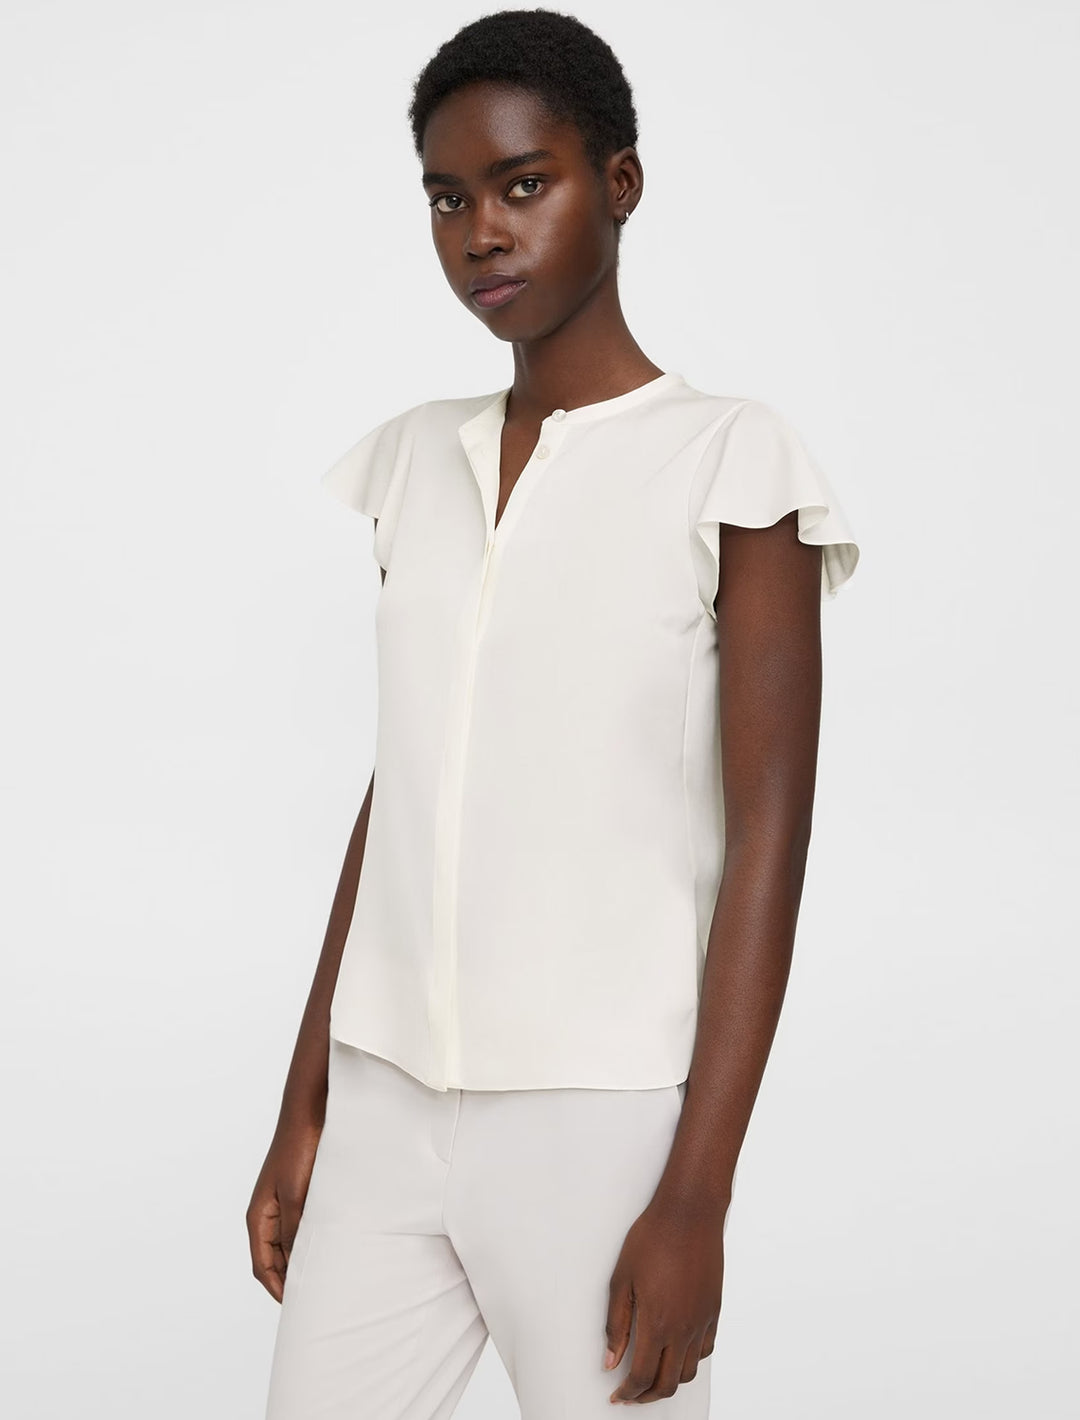 Model wearing Theory's ruffle sleeve top in ivory.